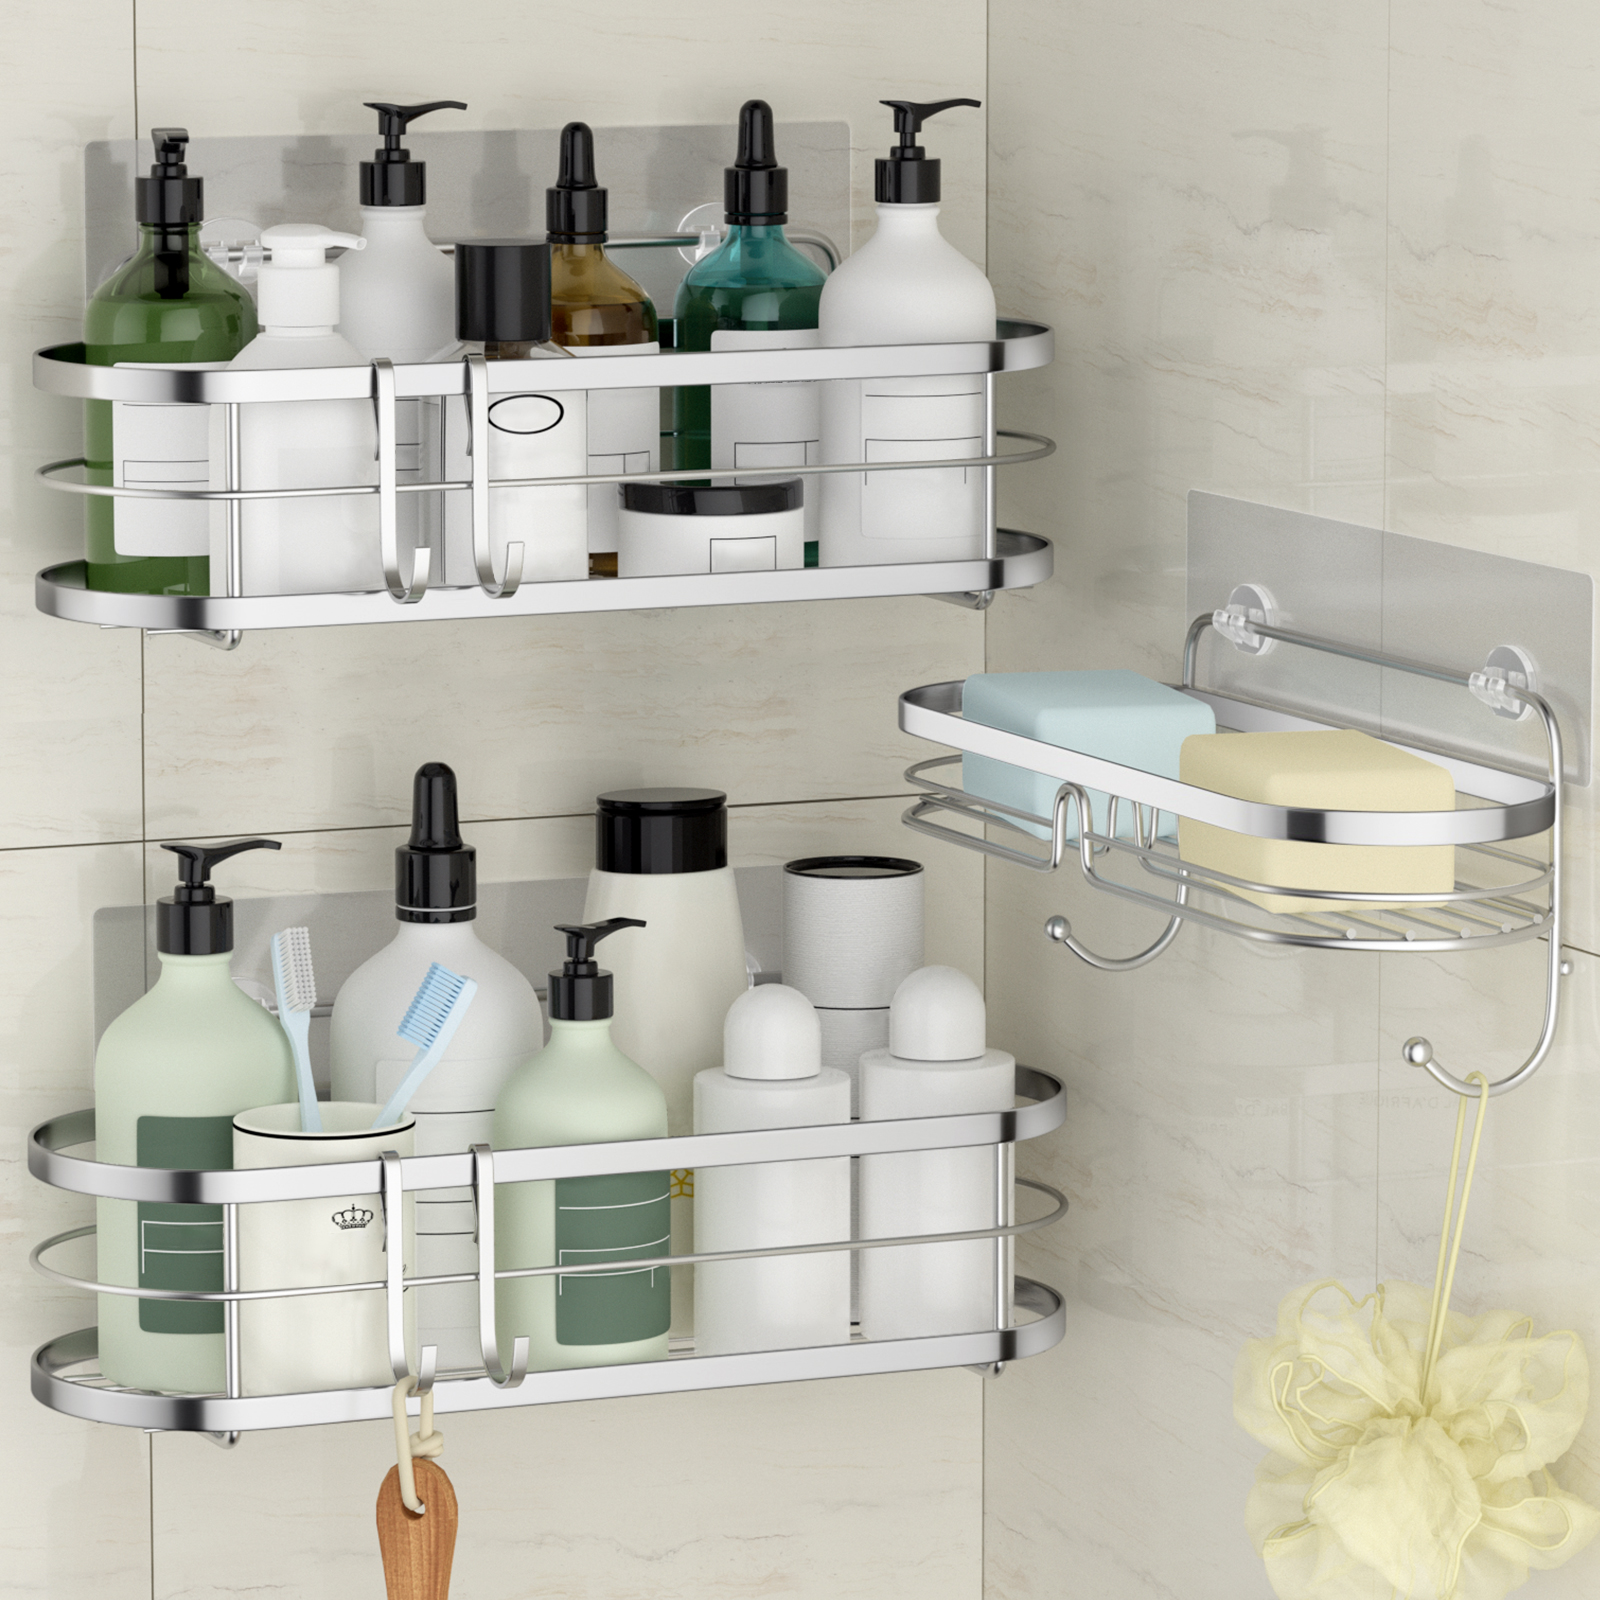 stusgo Shower Shelf for Bathroom, Adhesive Shower Caddy with Soap Dish  Holder with Hooks, No Drilling Shower Shelves Bathroom Shower Storage